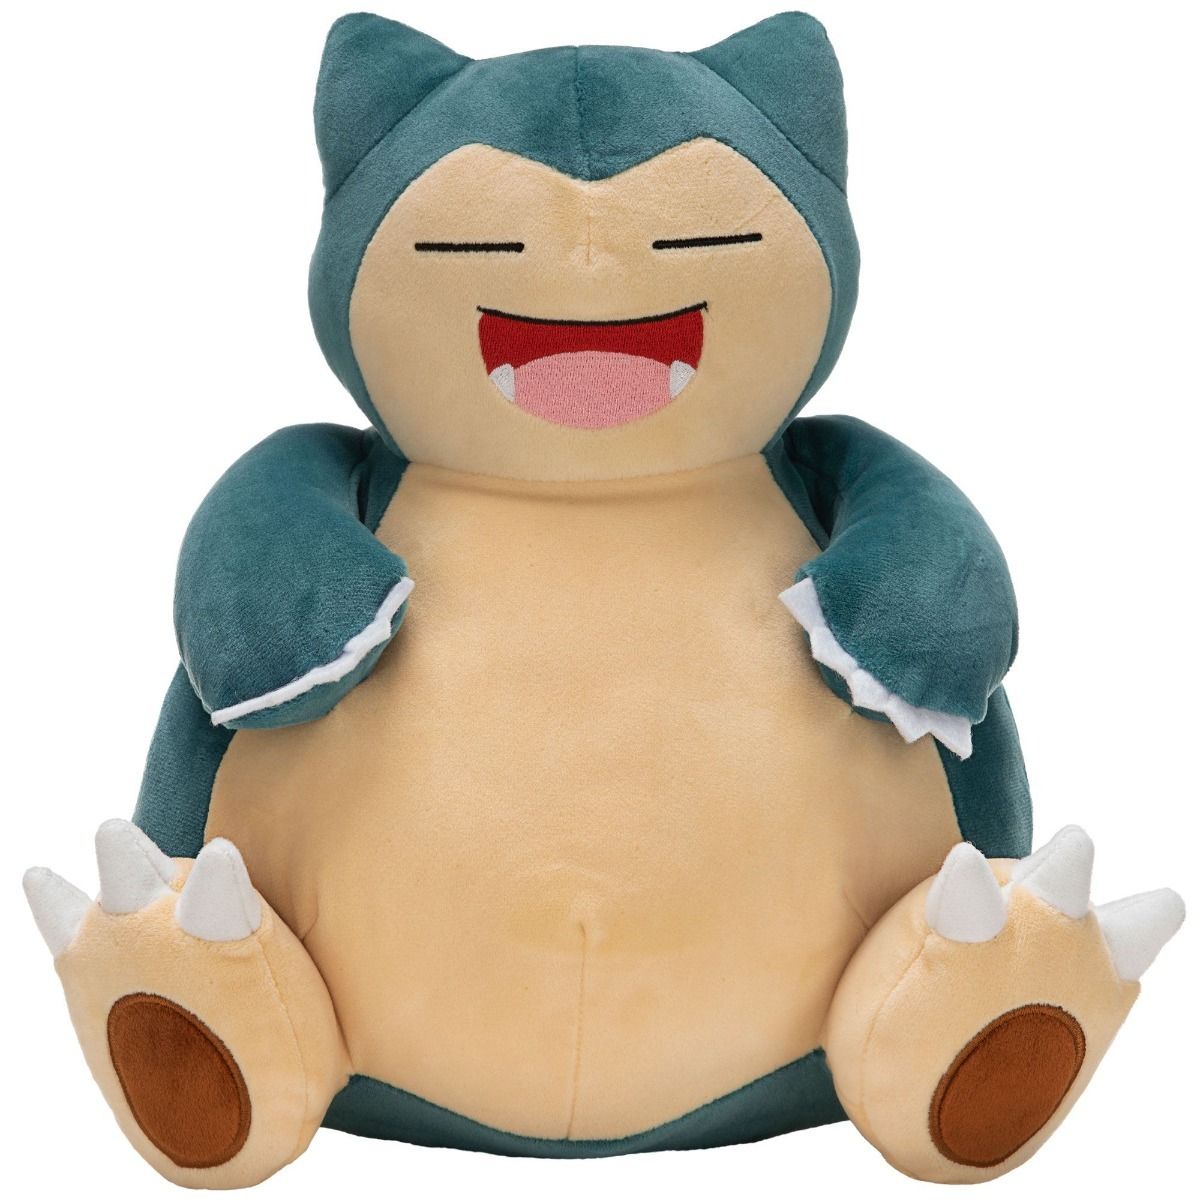 Buy Your Snorlax 12 inch Plush (Free Shipping) - Merchoid